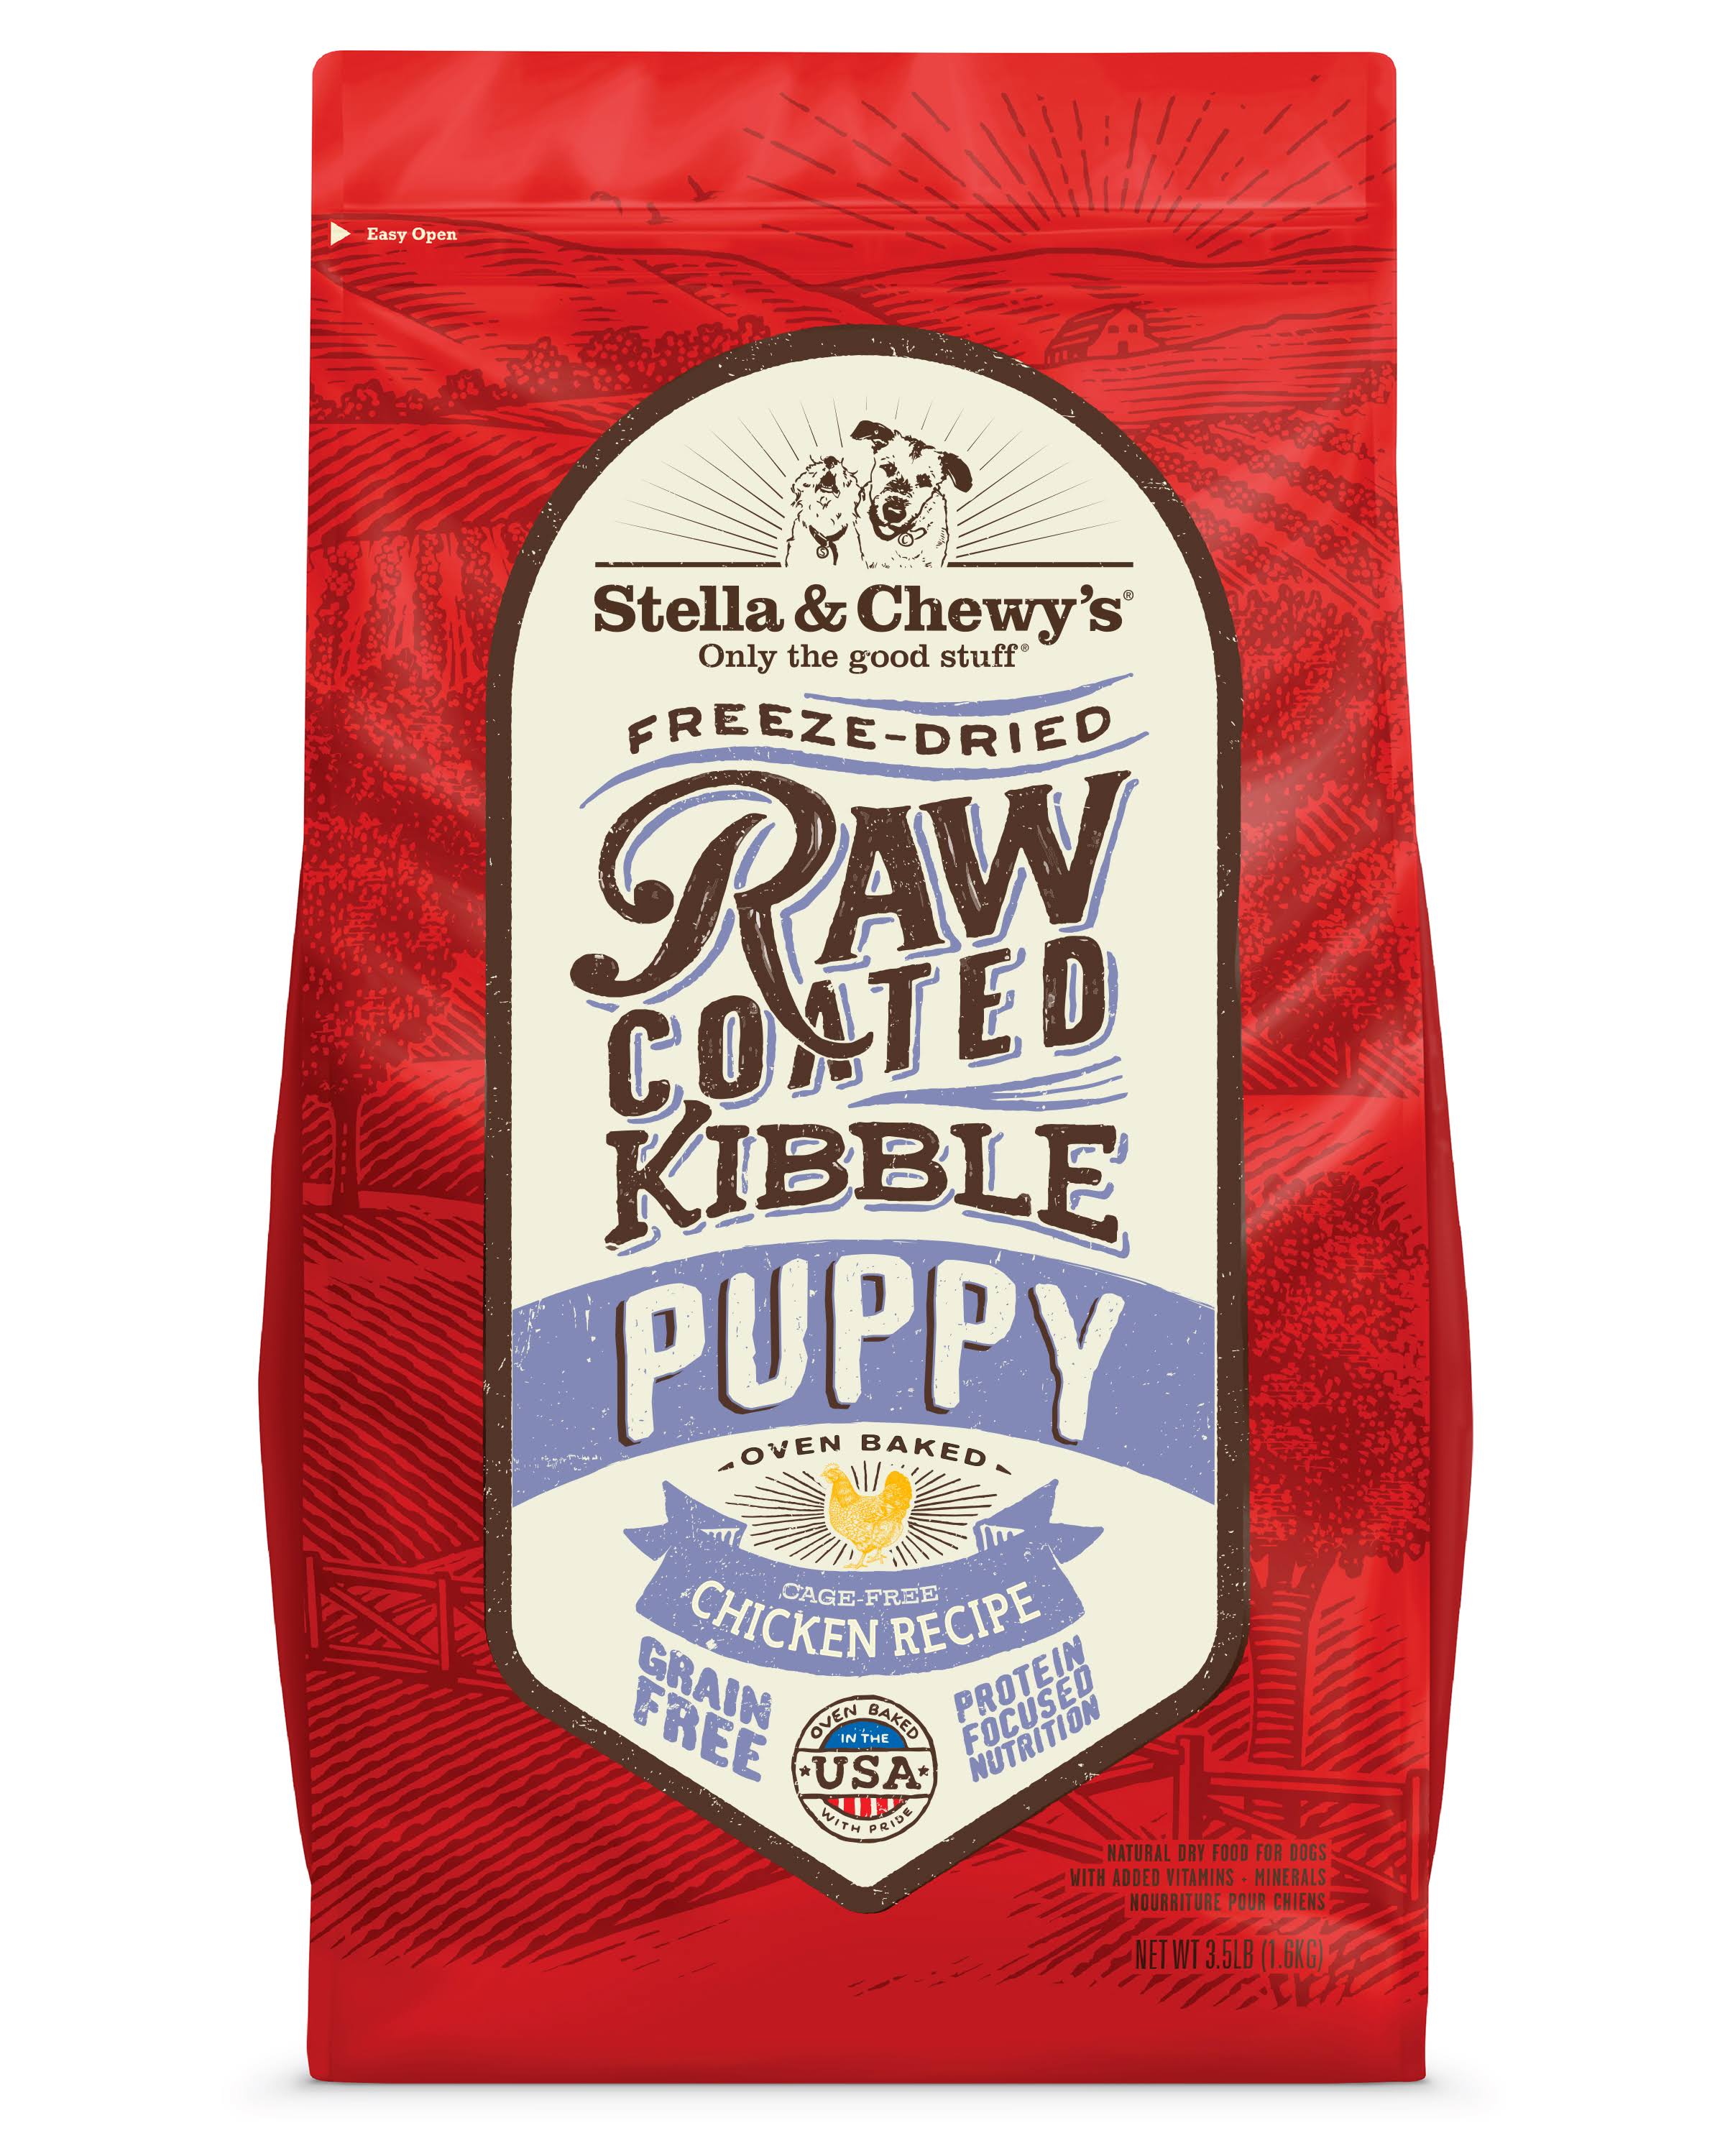 Stella & Chewy's Raw Coated Kibble Puppy Cage-Free Chicken / 3.5 lbs.